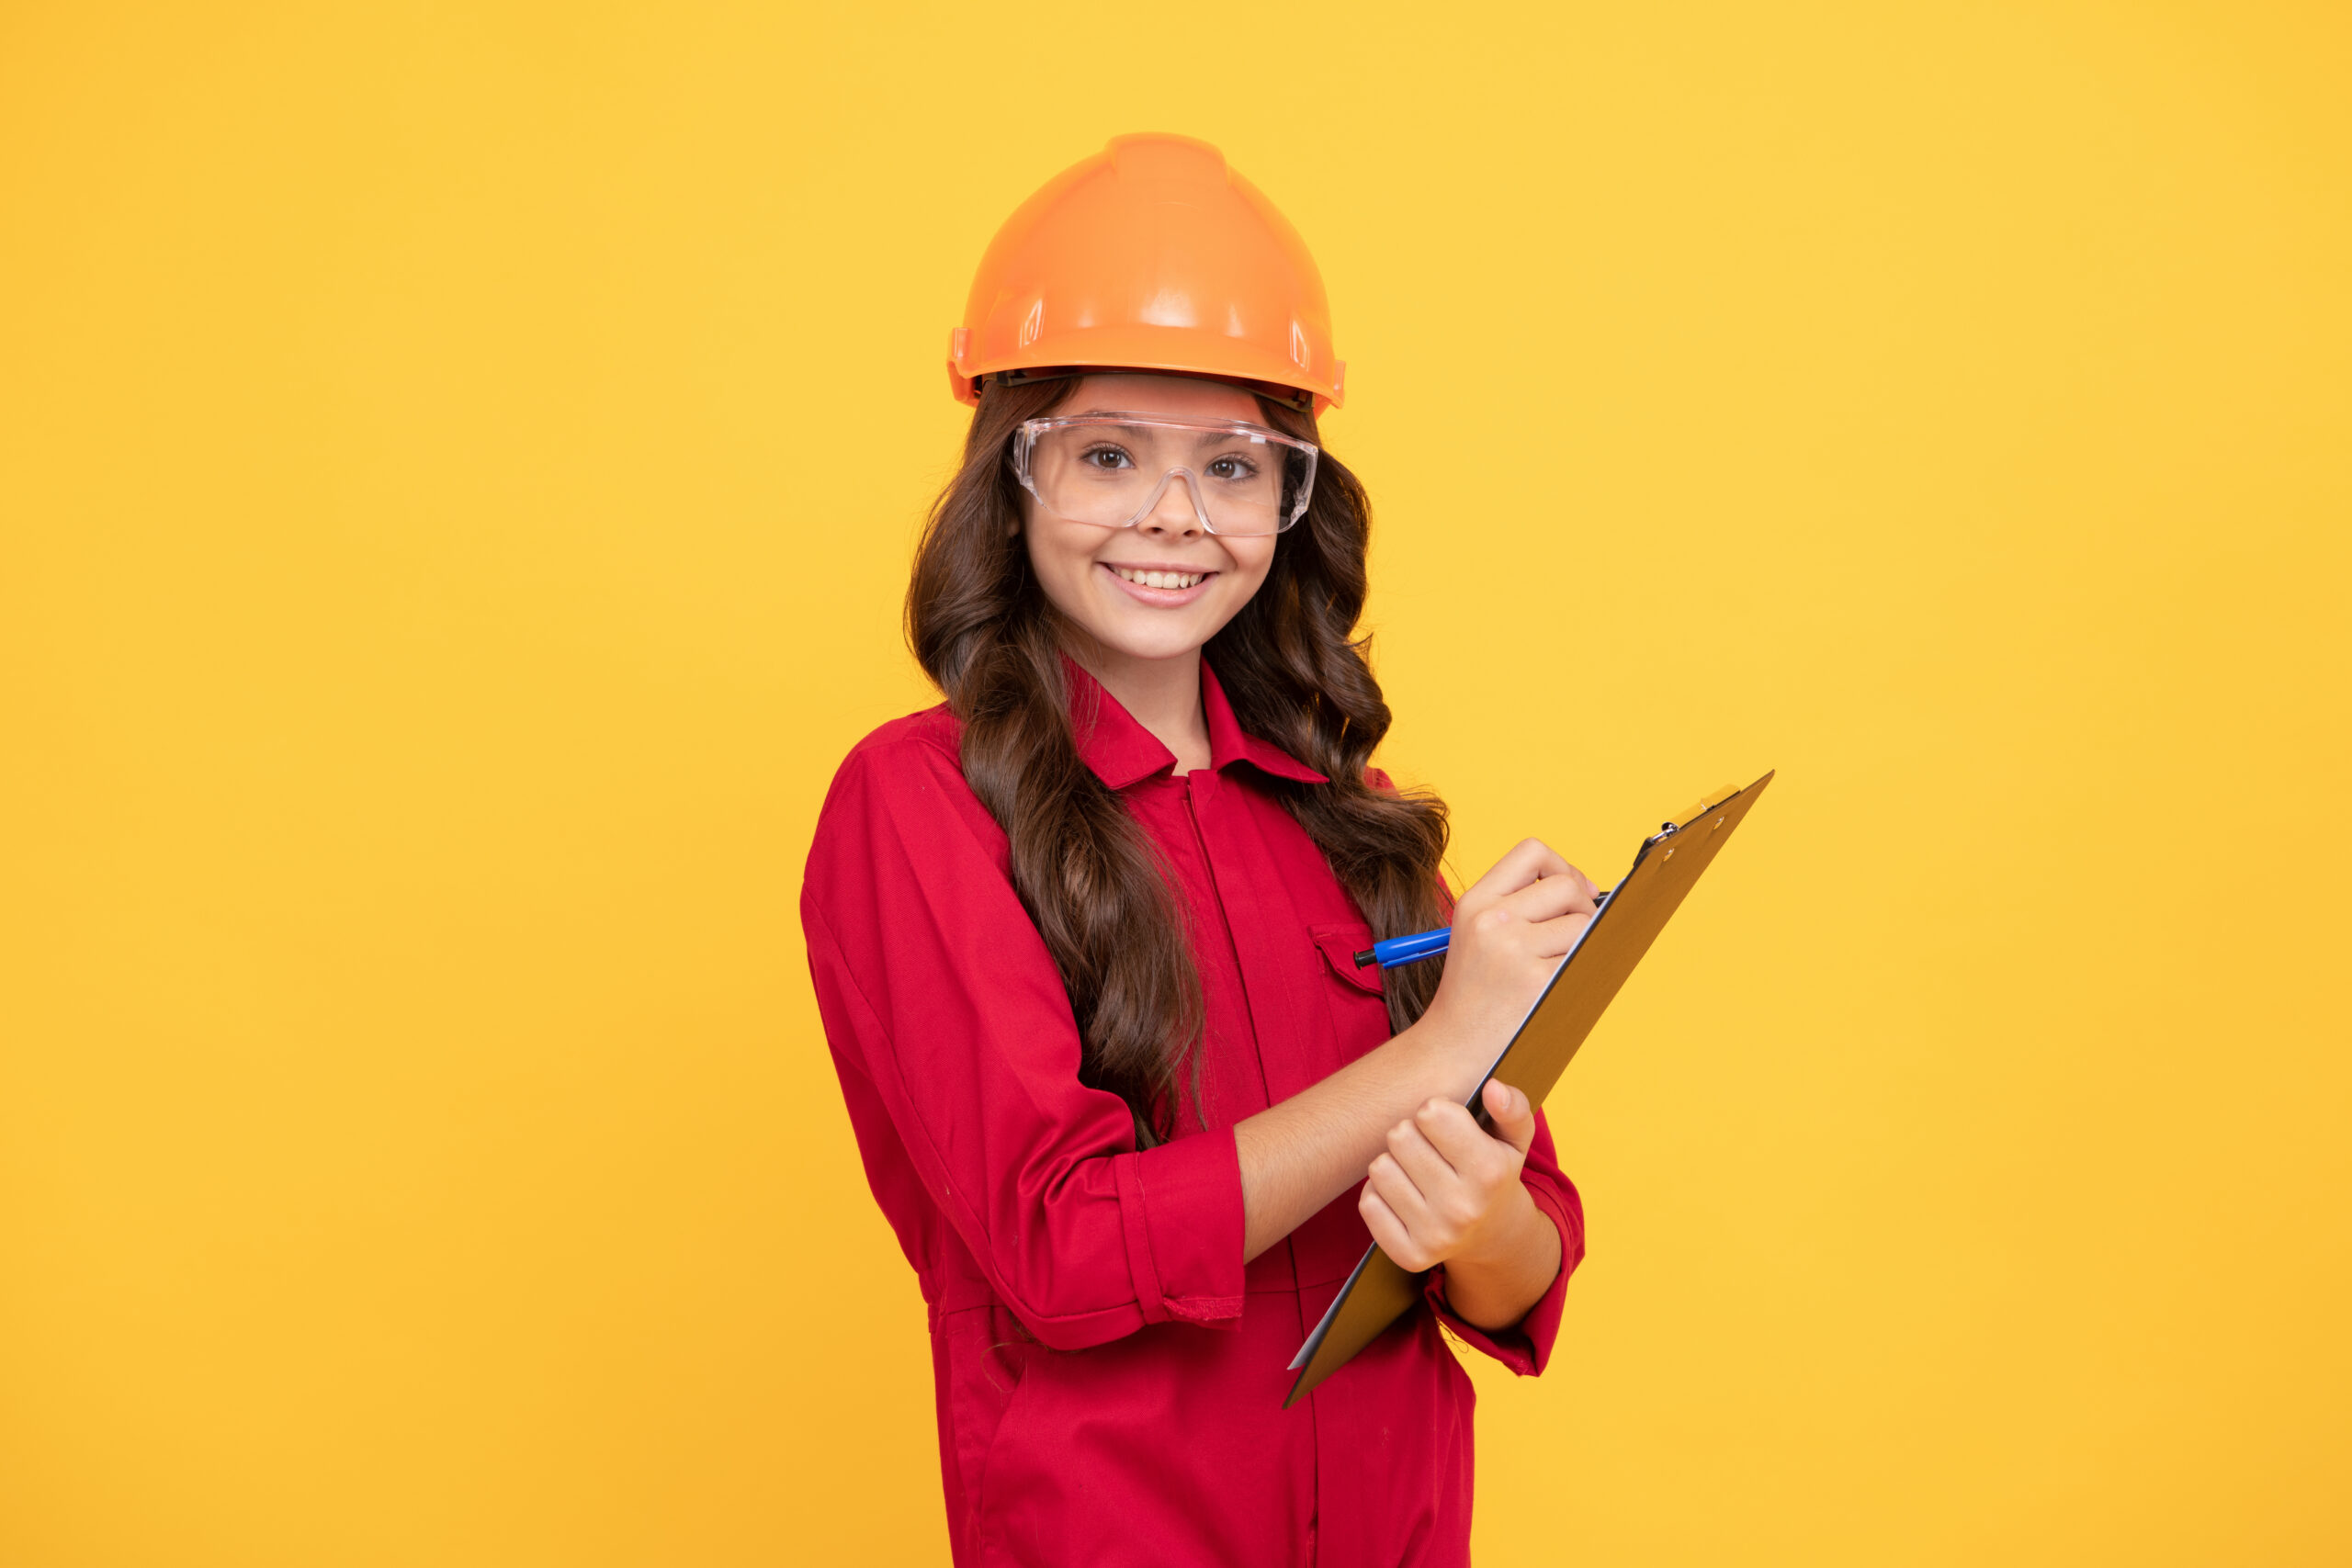 Child on yellow background wearing safety glasses